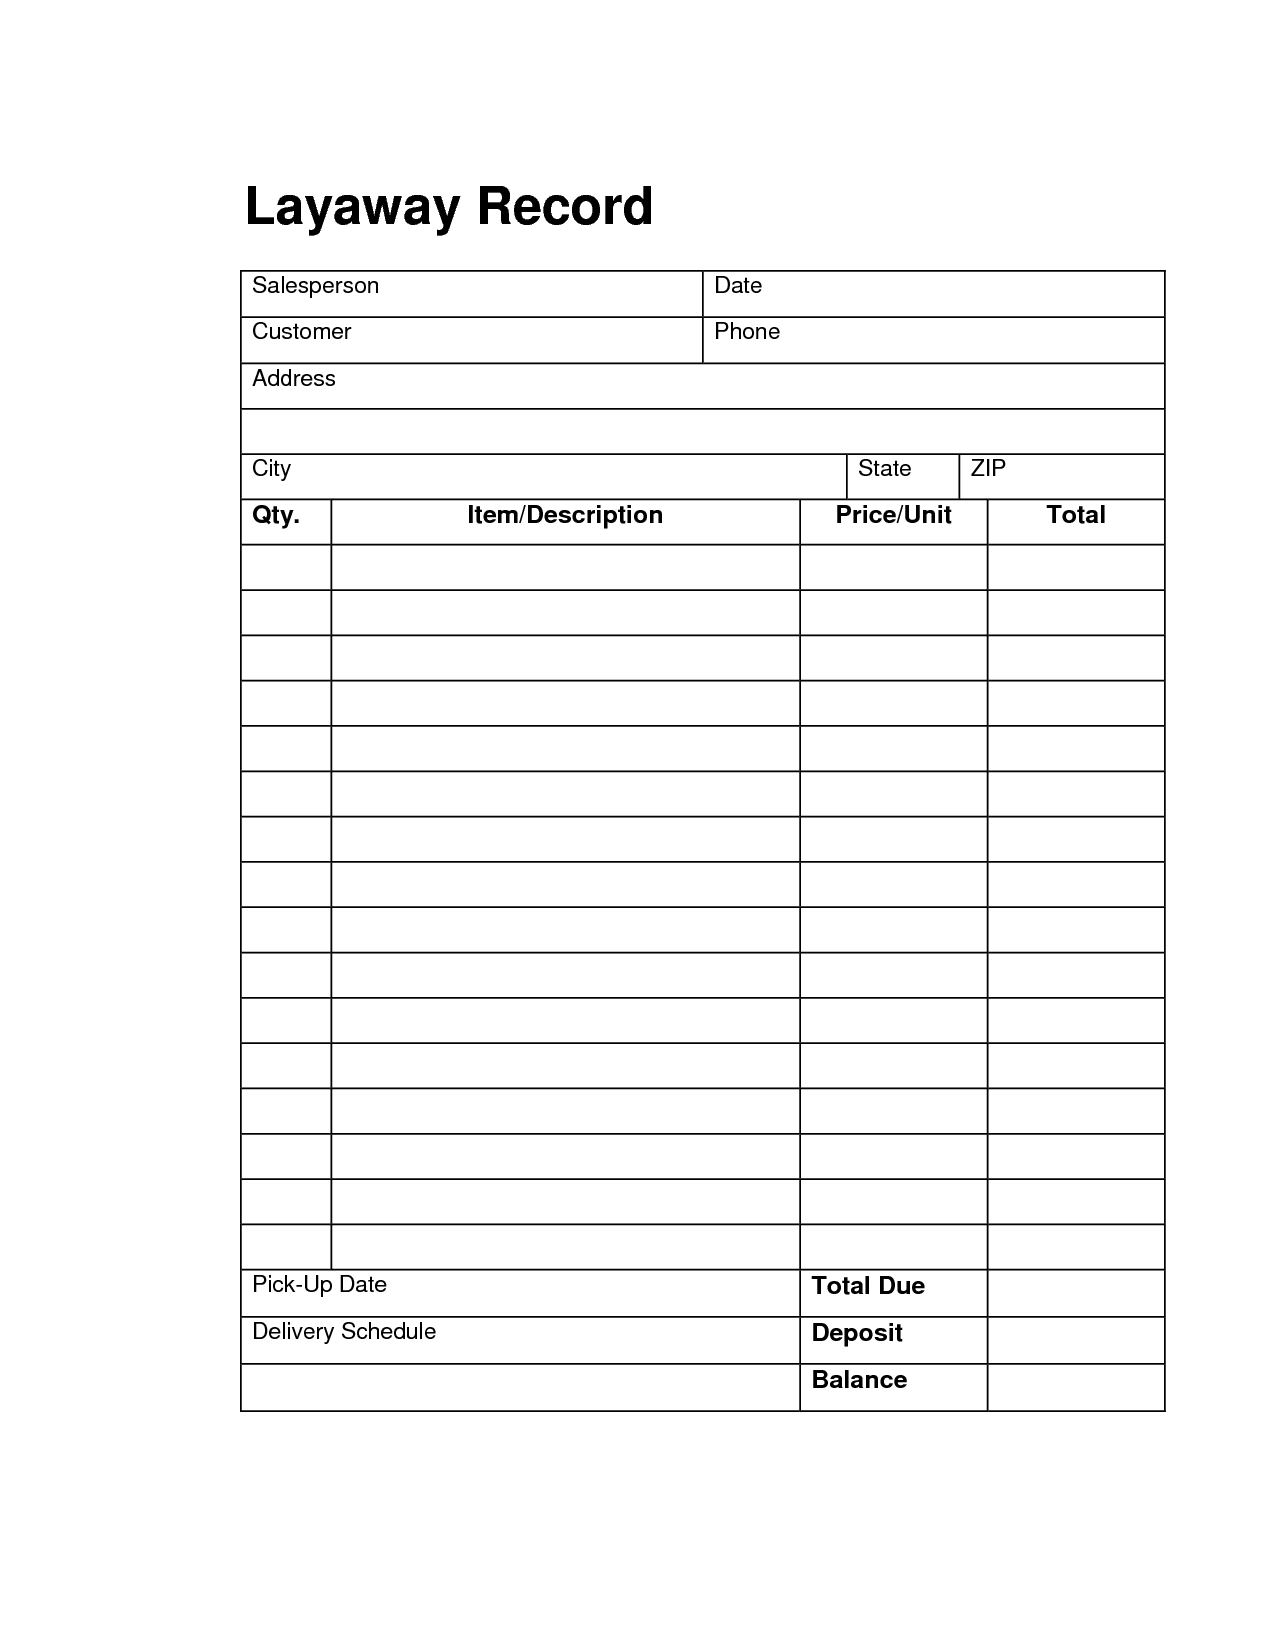 8-best-images-of-layaway-agreement-forms-printable-free-layaway